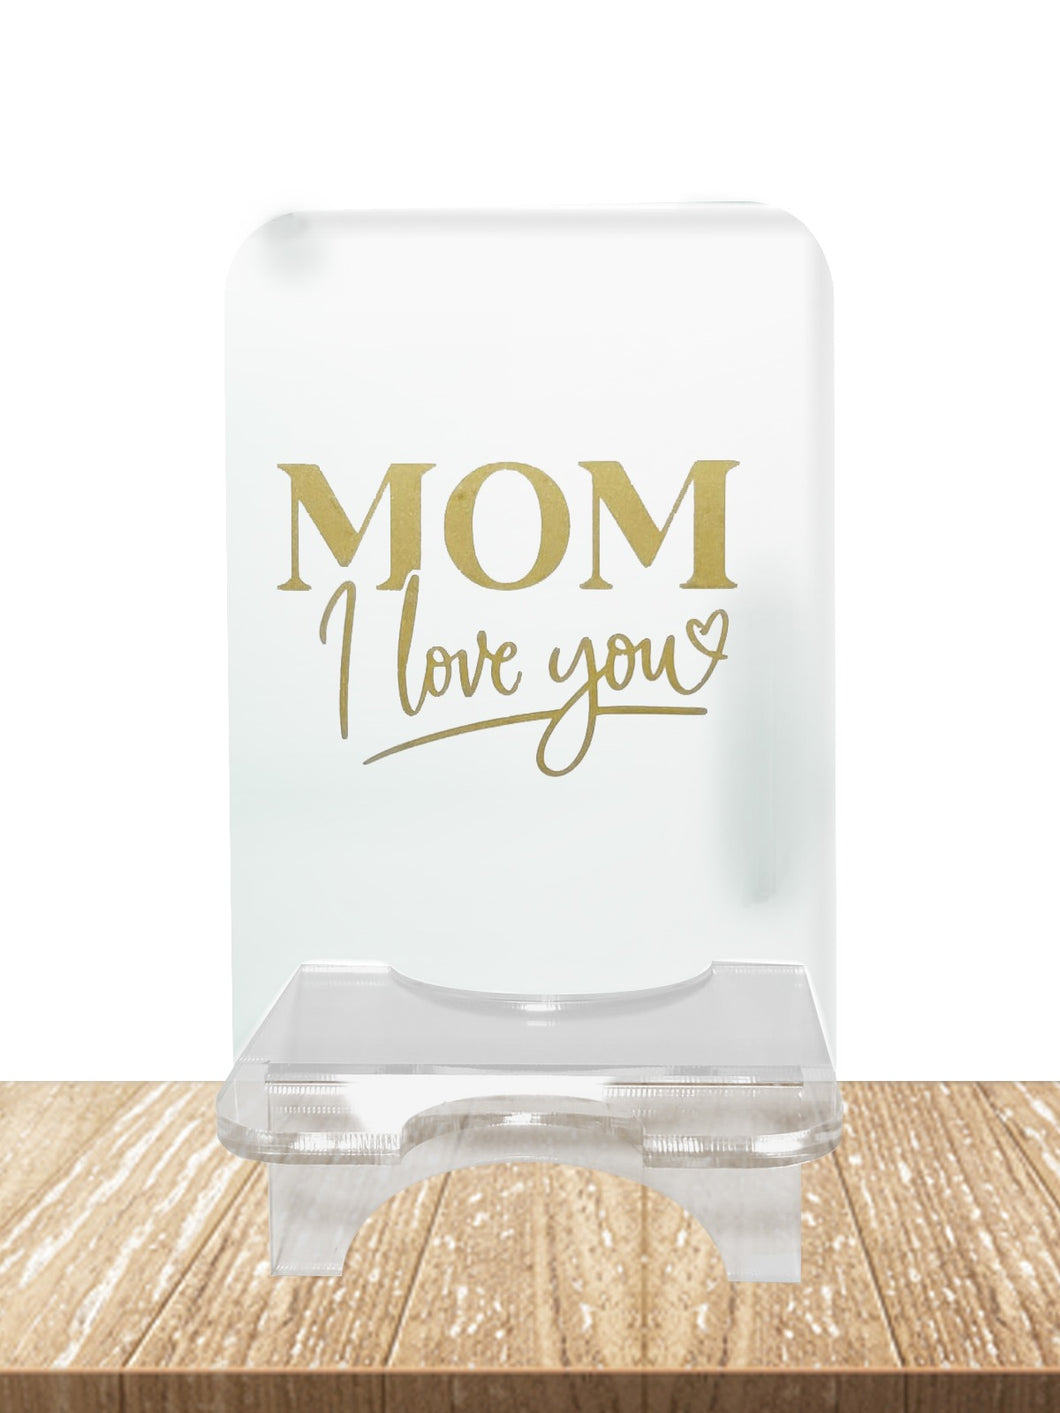 Personalized Mobile Holder